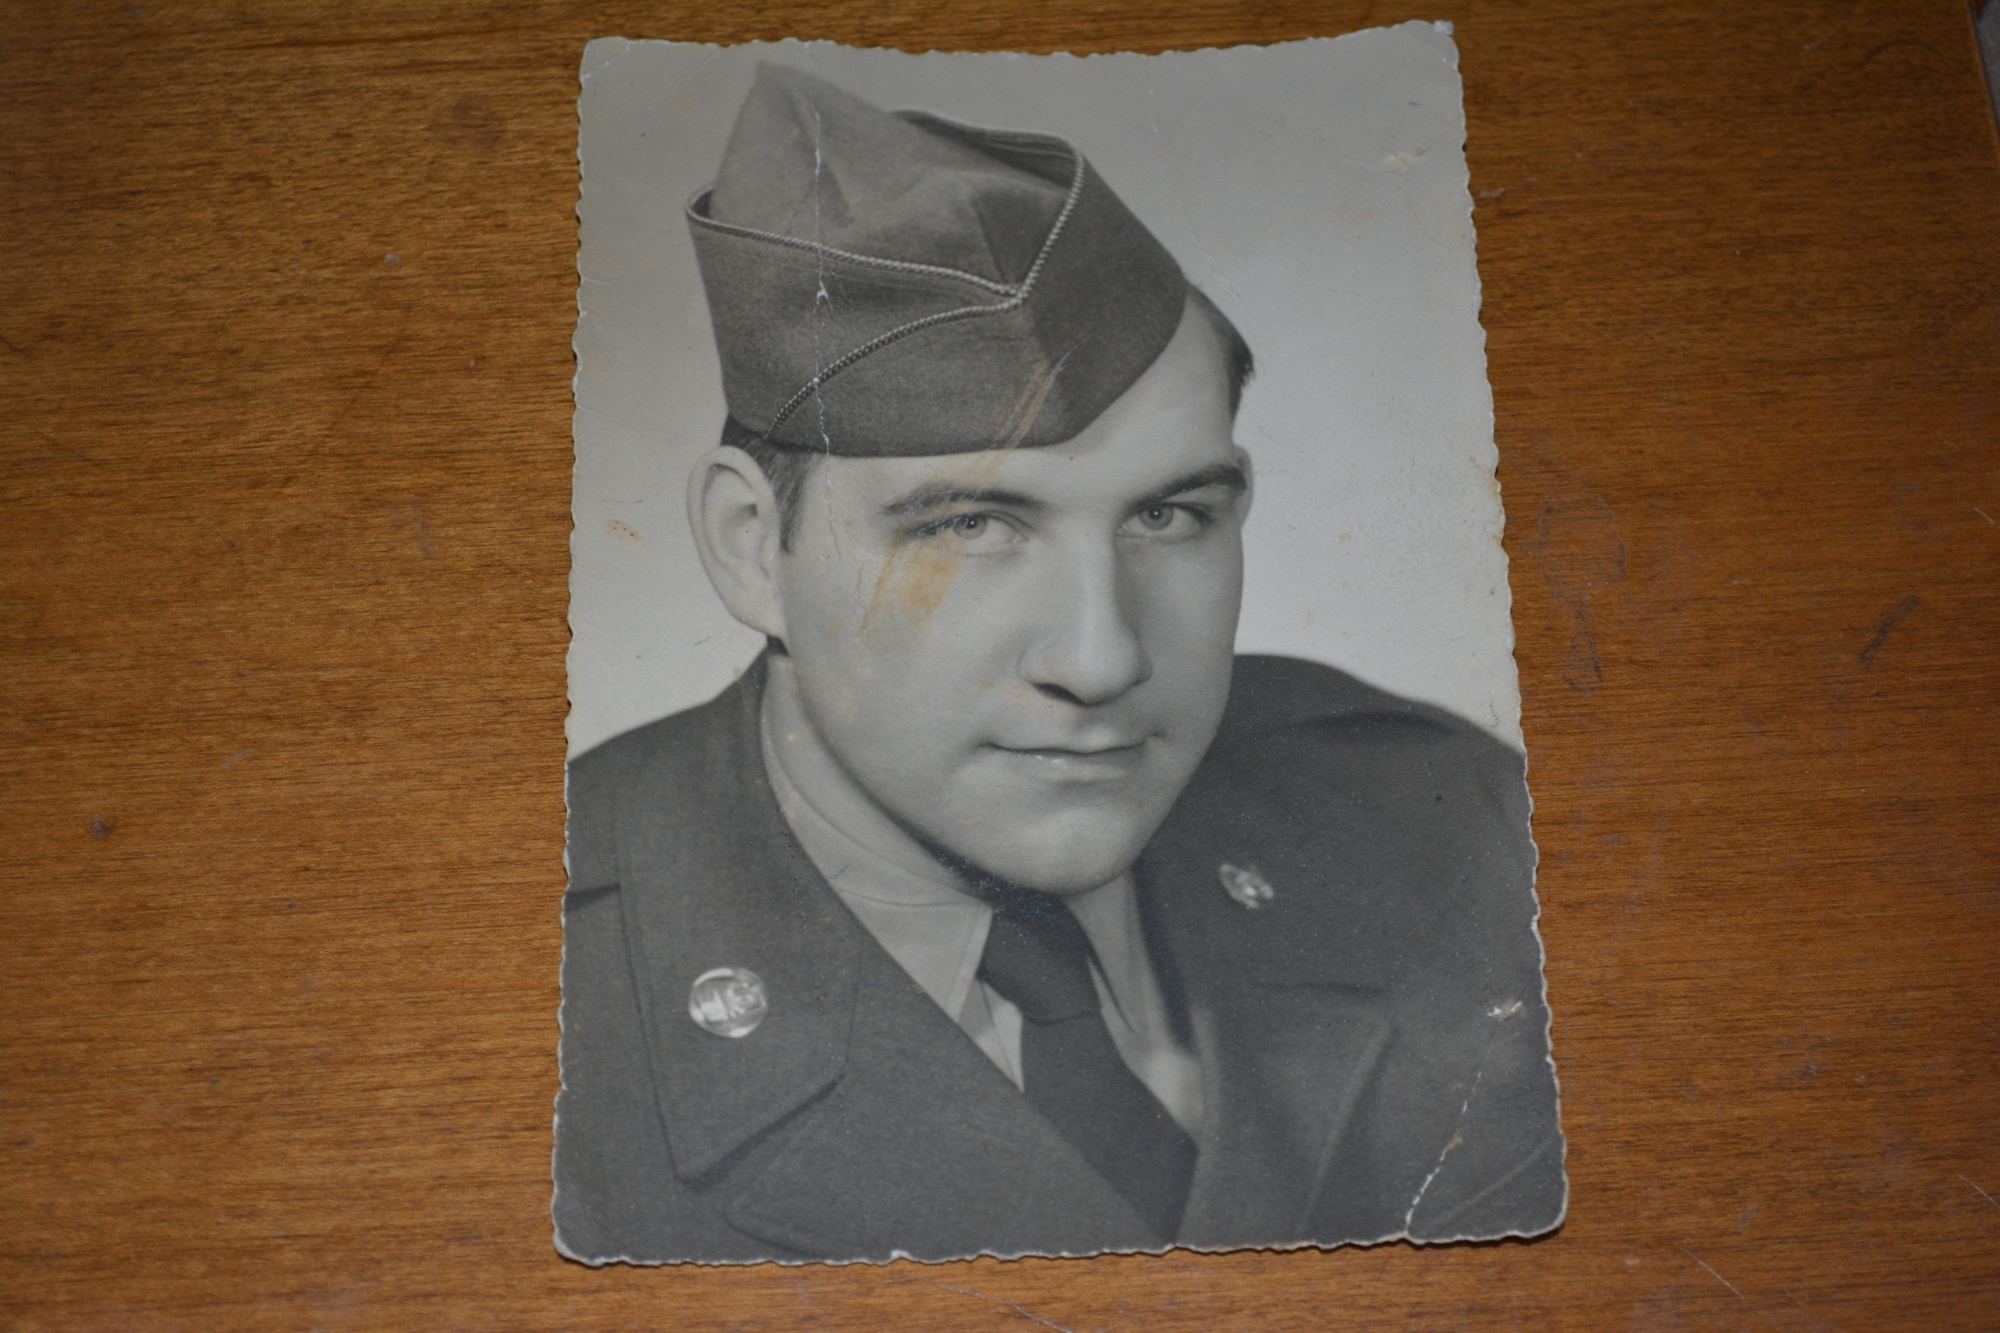 Frank Royer keeps a photo of himself while serving with the Army during the Korean War era.